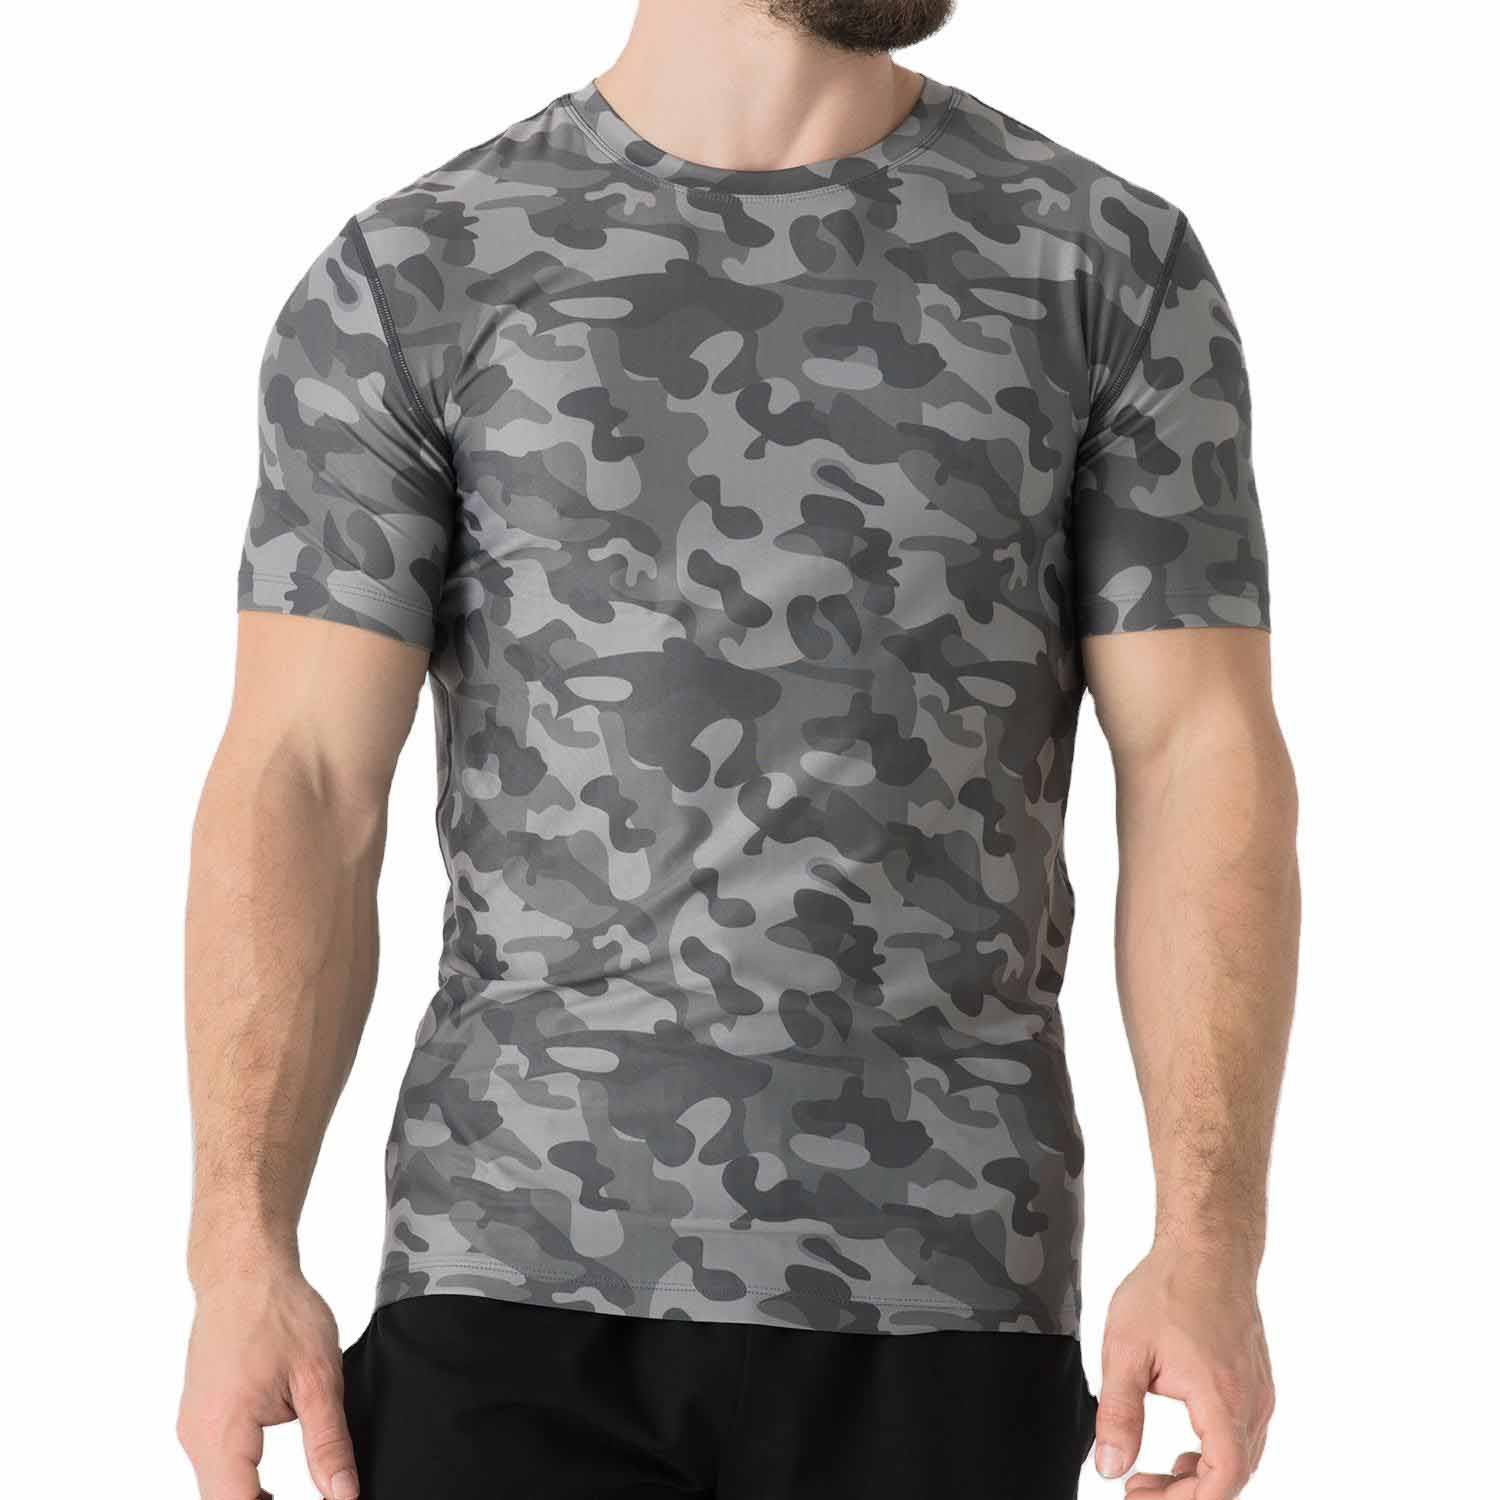 Camo Digital Printed Polyester Spandex Quick Dry Athletic Tee Muscle ...